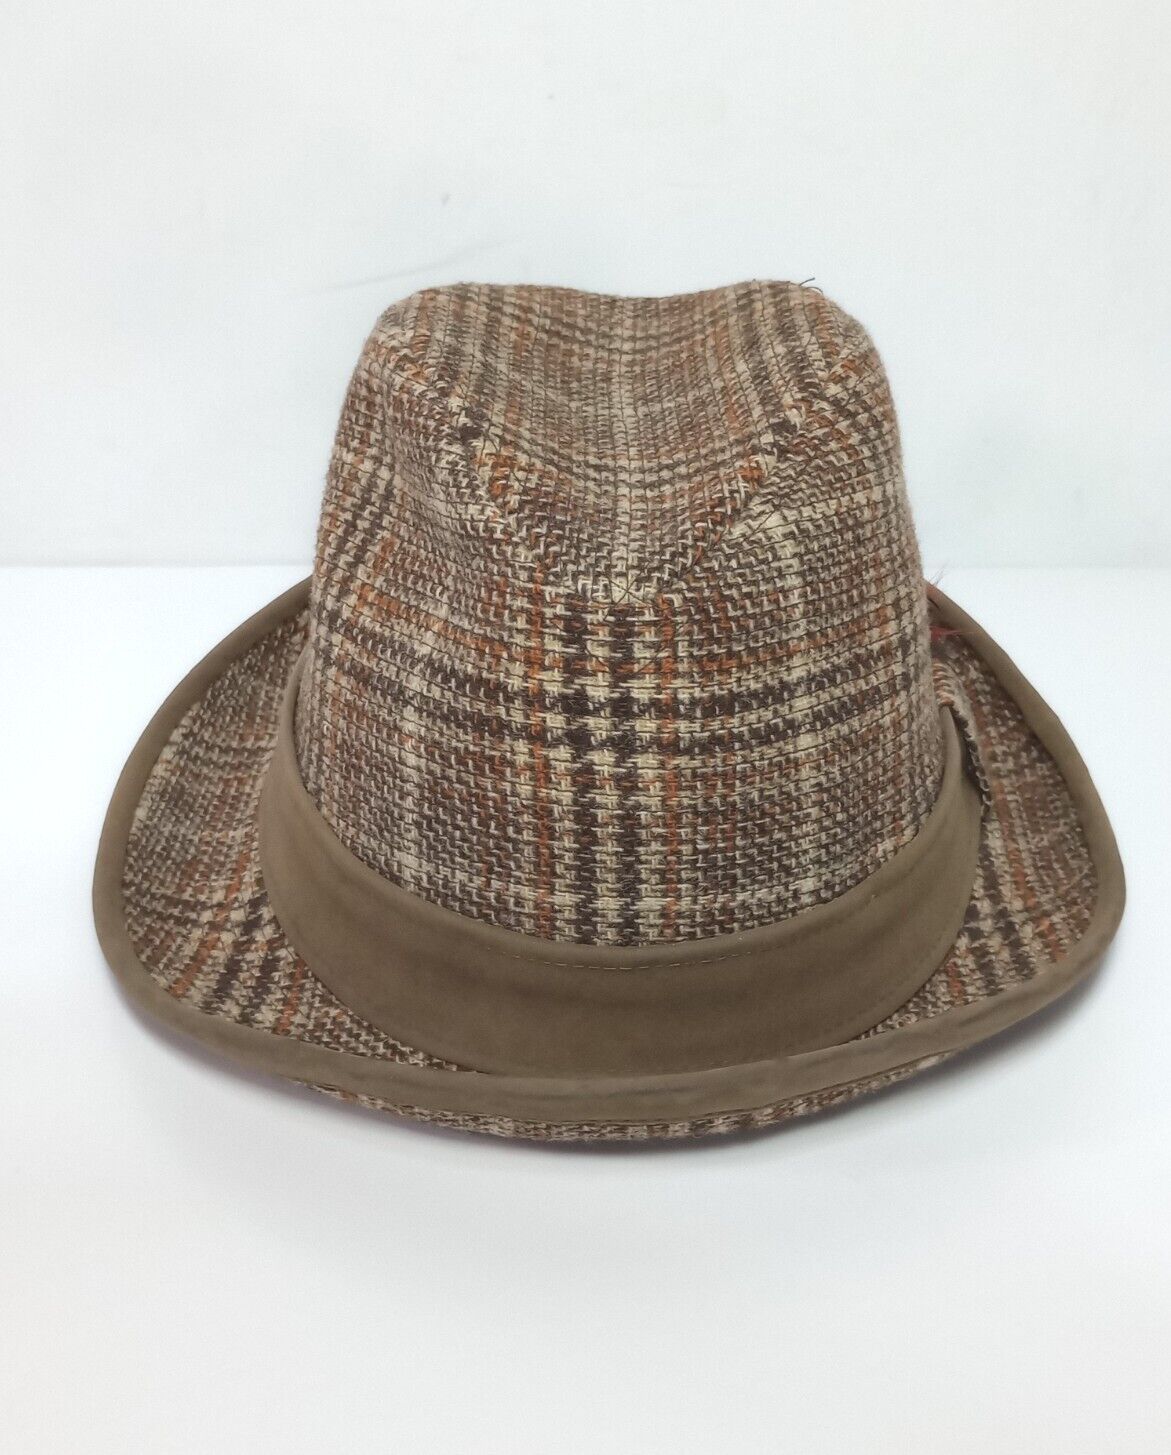 Vintage Dobbs Hat 5th Fifth Avenue New York Fedora 7 1/4 Hat w/ Feather